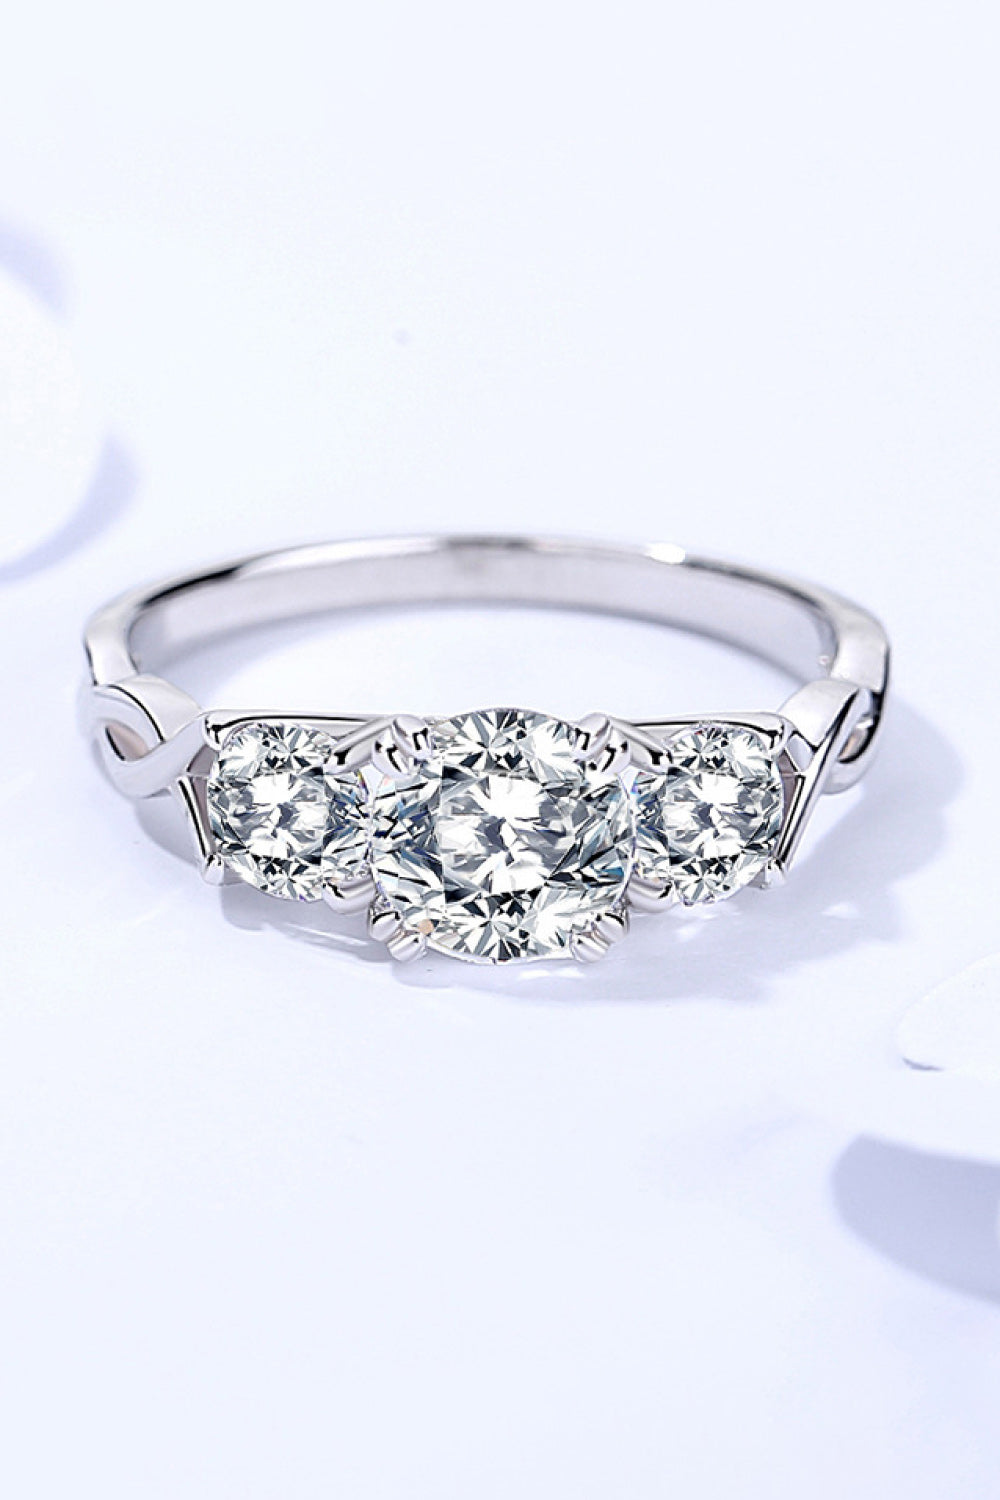 1 Carat 3 Stone Round Brilliant Cut Moissanite Platinum Over Pure Sterling Silver Ring - Sparkala